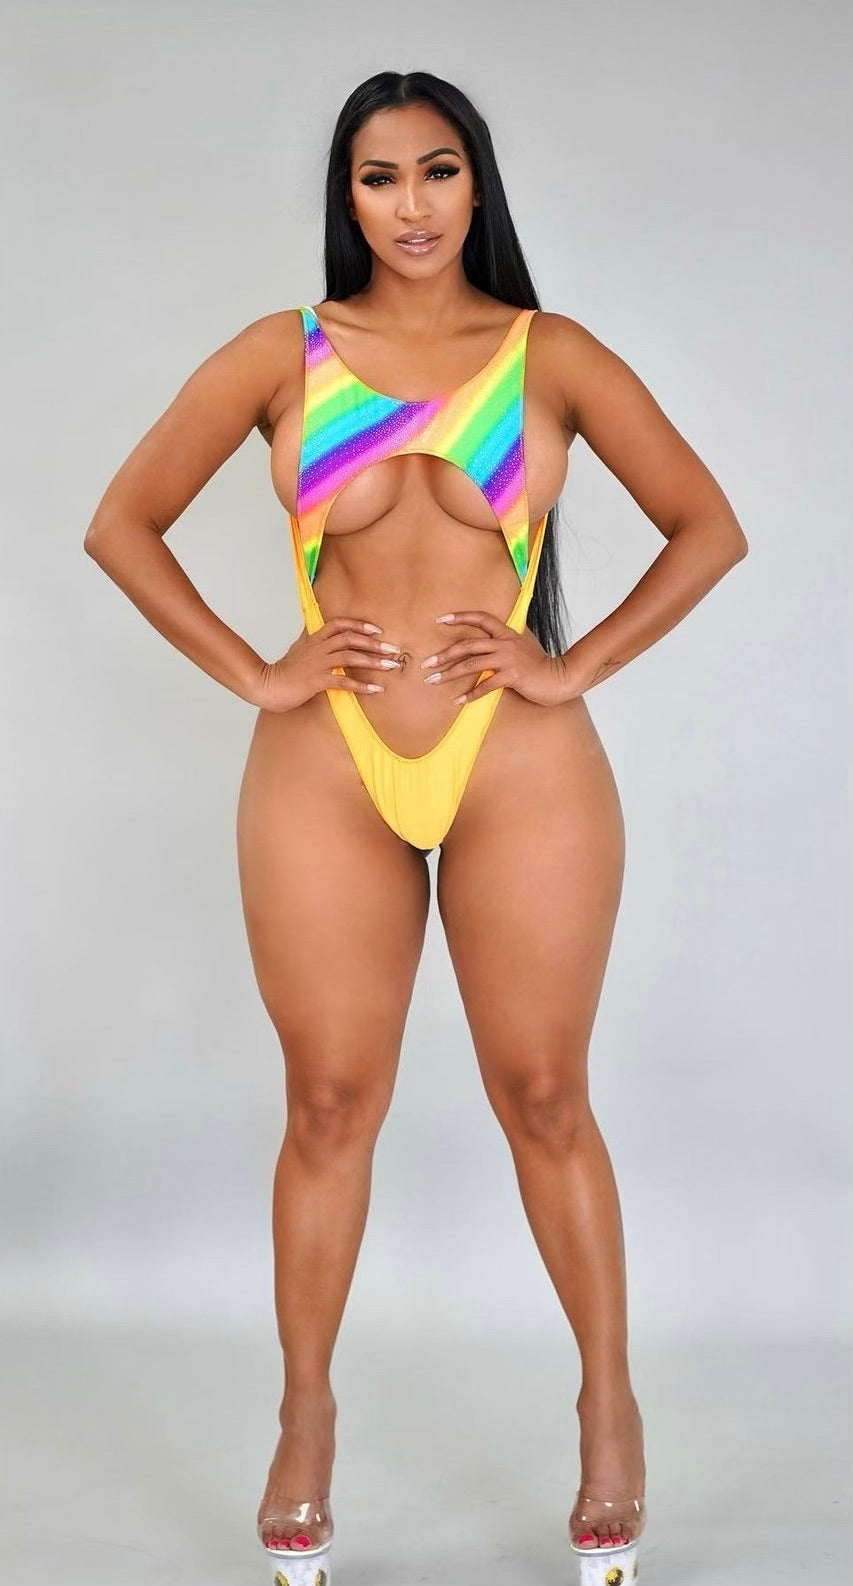 The Rainbow Neon Set will help you show off your feminist pride and curves in style. Bright, vibrant colors make it sure to draw attention, perfect for any look. Feel confident and empowered with this sassy set.